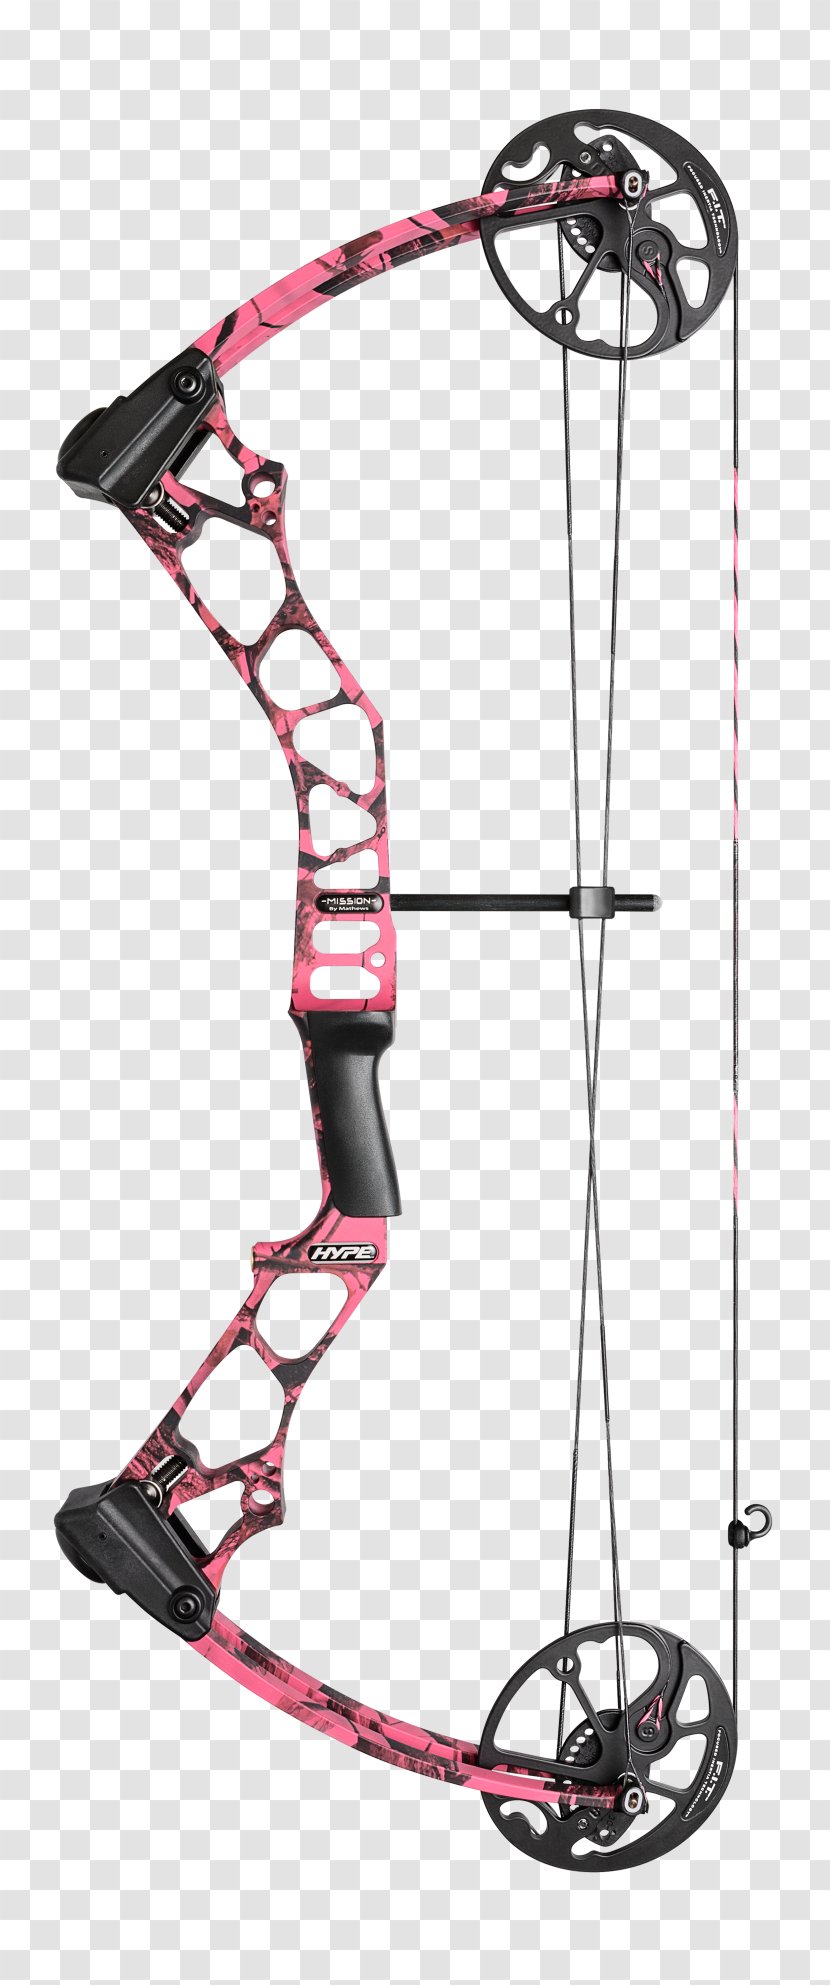 Archery Compound Bows Bow And Arrow Bowhunting Transparent PNG